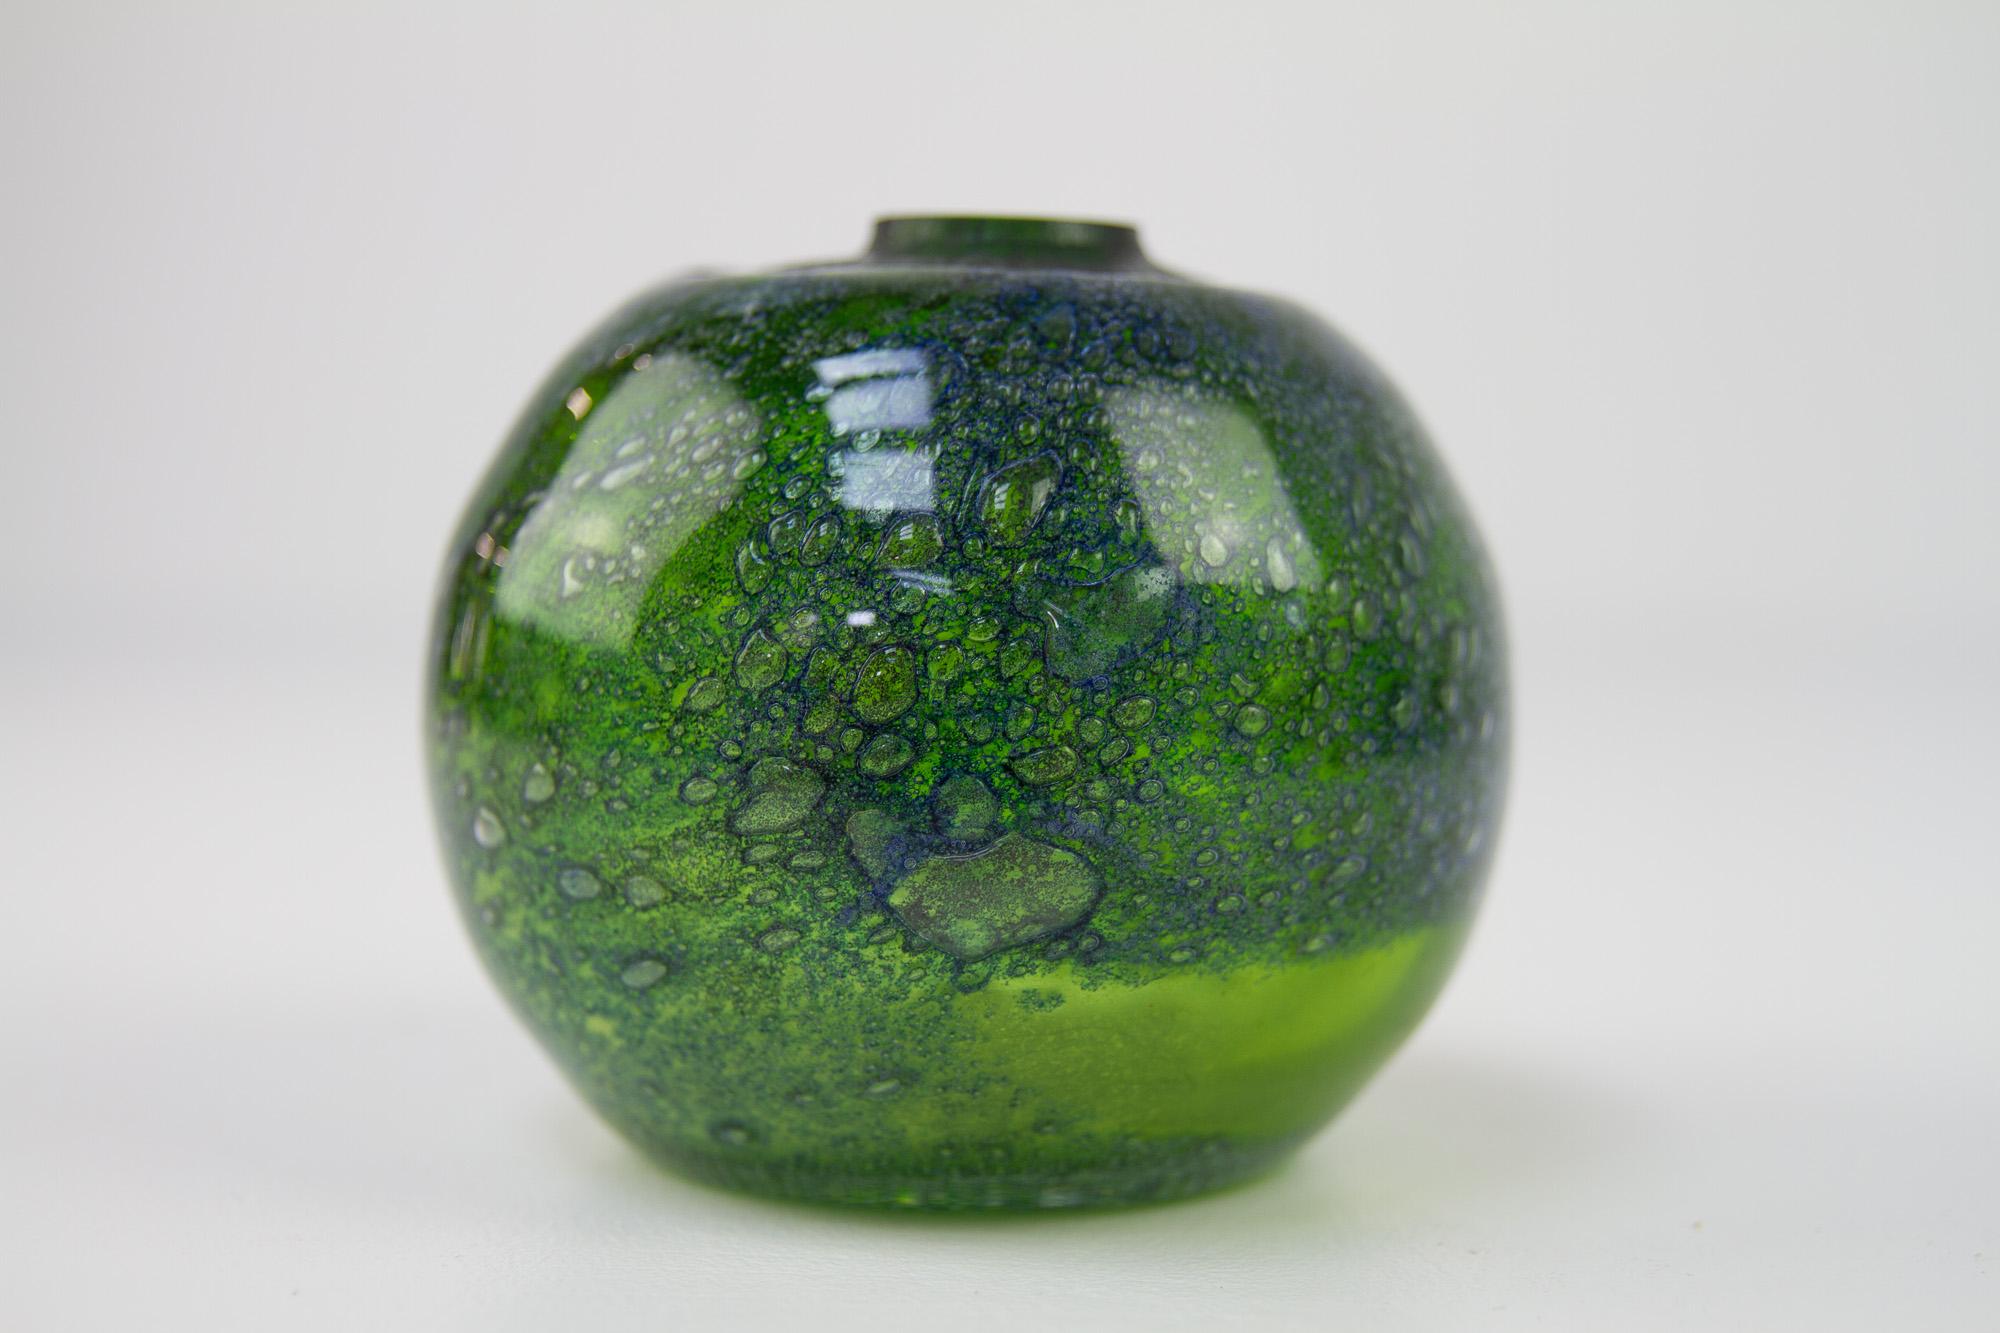 Vintage Norwegian Green Glass Vase by Benny Motzfeldt, 1960s.
Small round vase in green glass with controlled air bubbles. Still with its original sticker: 